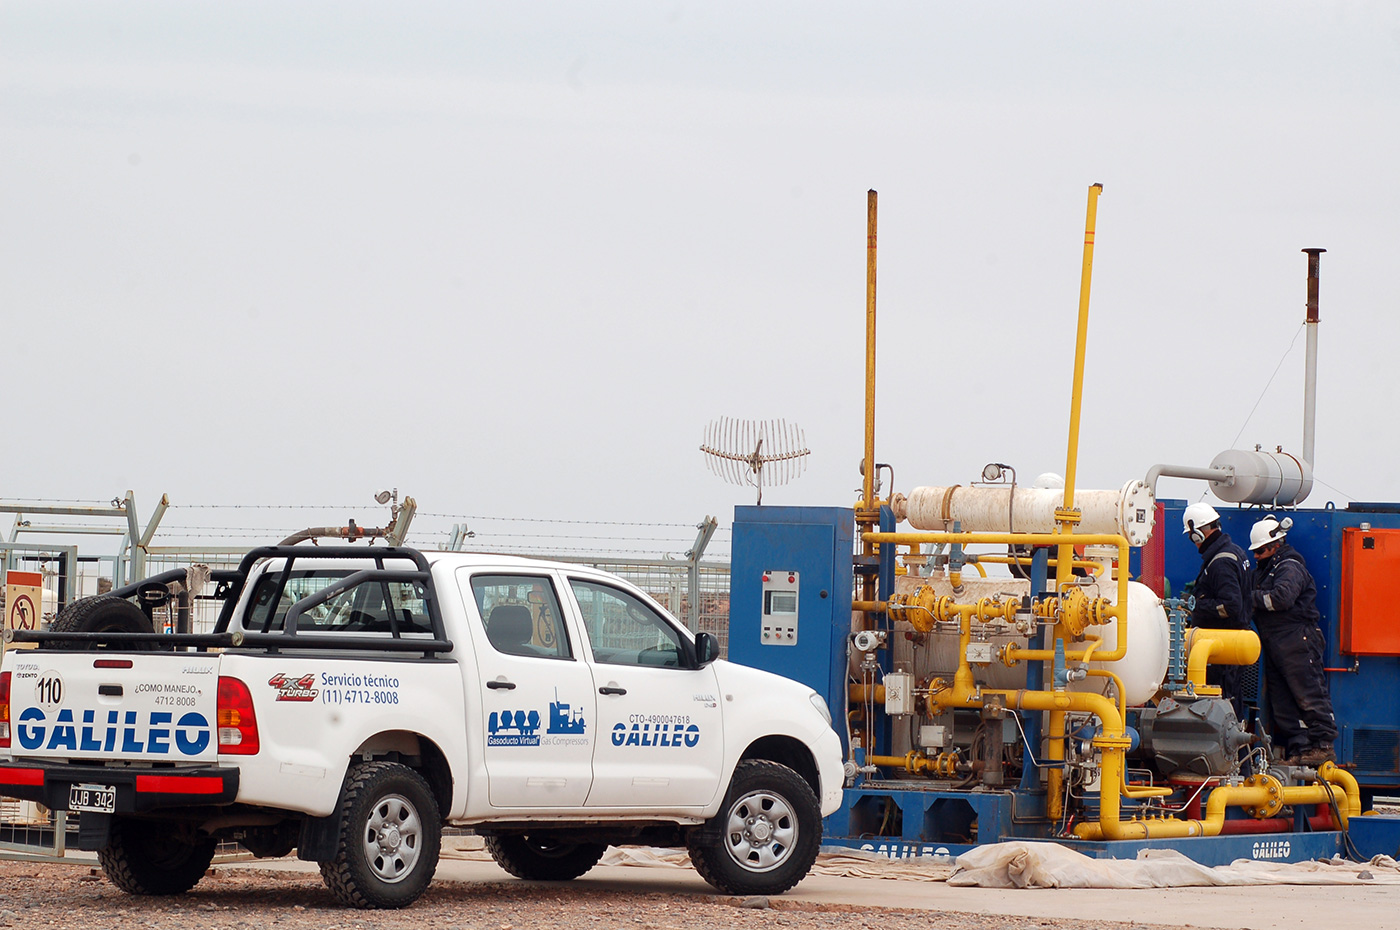 Galileo's Field Services personnel monitoring performance of Galileo Process™ compressors in a mature well operated by YPF (Yacimientos Petroliferos Fiscales) in Loma de la Lata, Argentina.